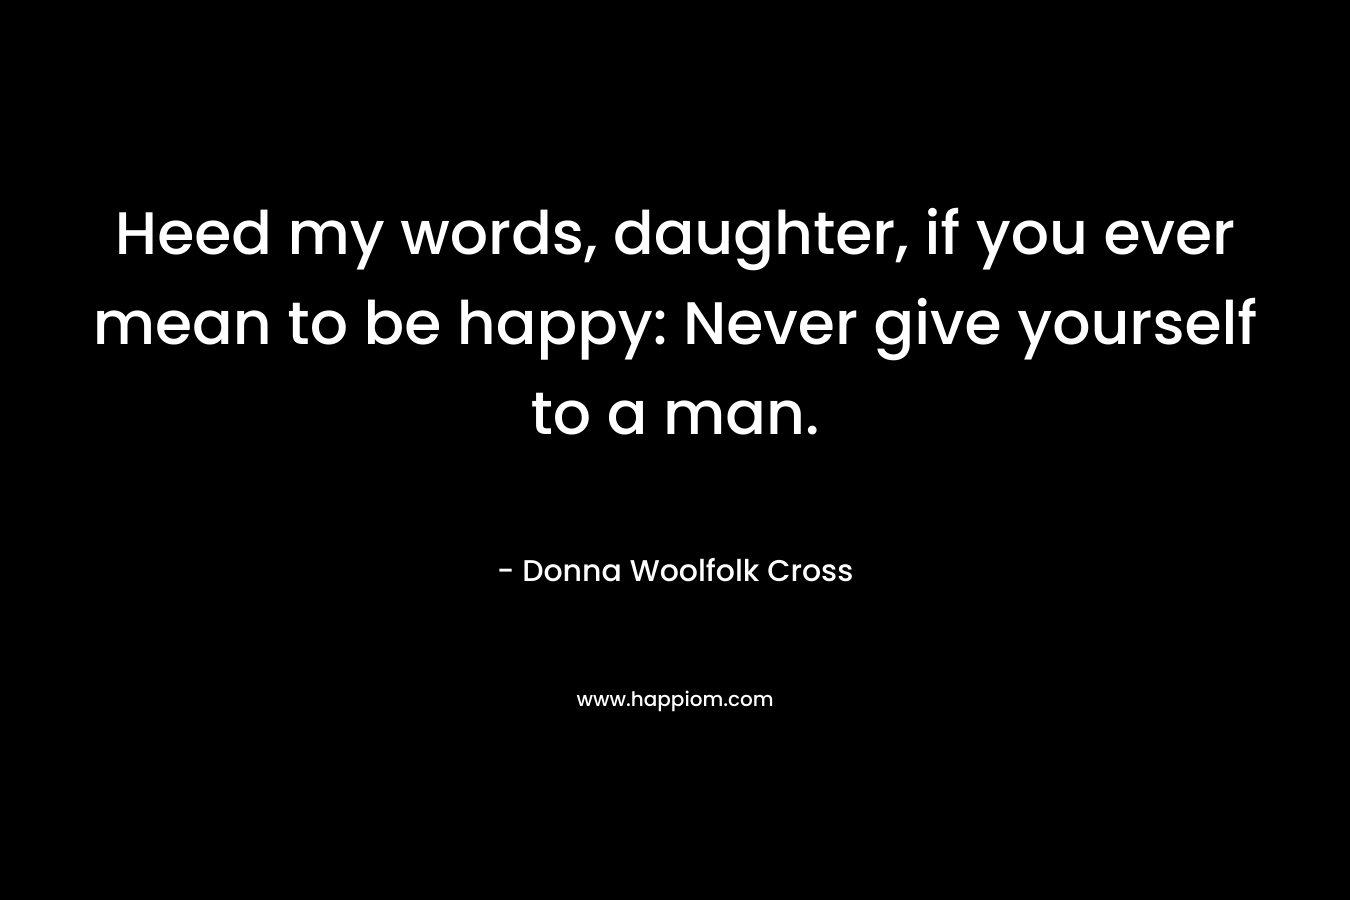 Heed my words, daughter, if you ever mean to be happy: Never give yourself to a man.